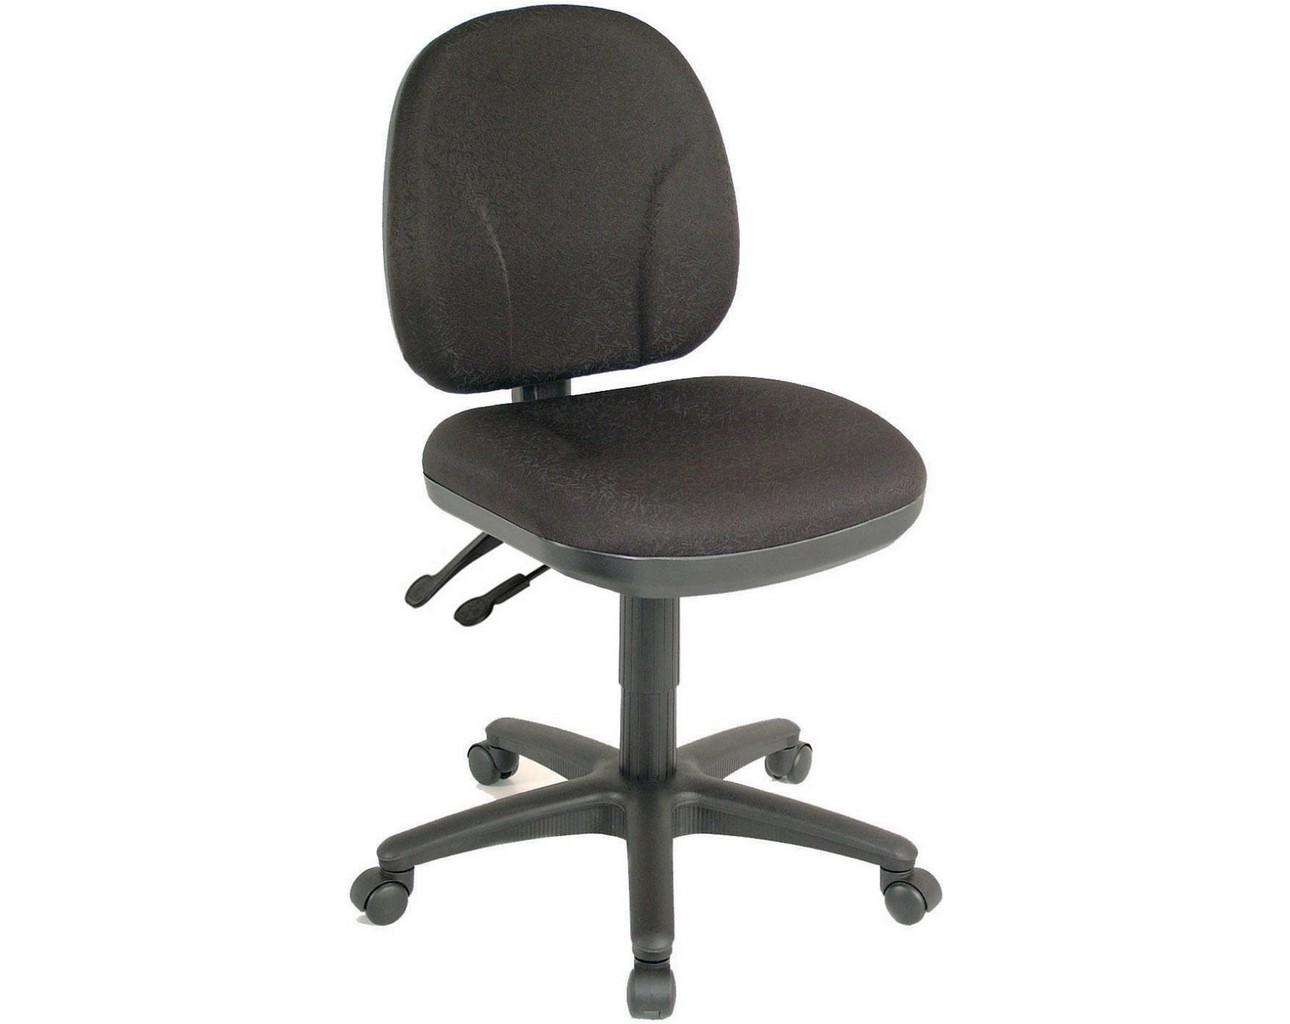 Comformatic Tilt Seat and Back Chair - Black Fabric